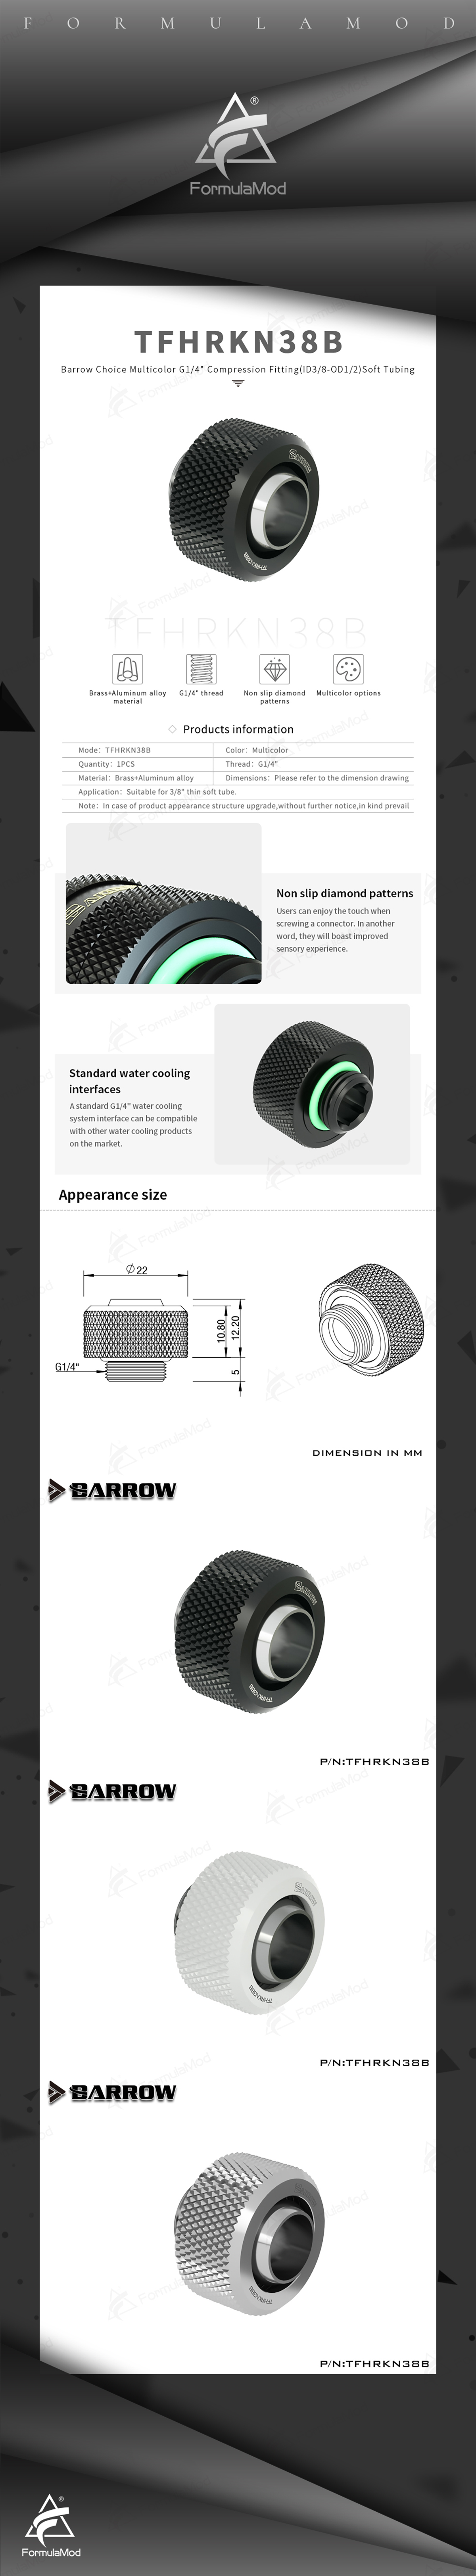 Barrow Soft Tube Fitting For 10x13 mm (3/8"ID*1/2"OD), G1/4" Compression Connector, Water Cooling Soft Tubing Compression Adapter, TFHRKN38B  